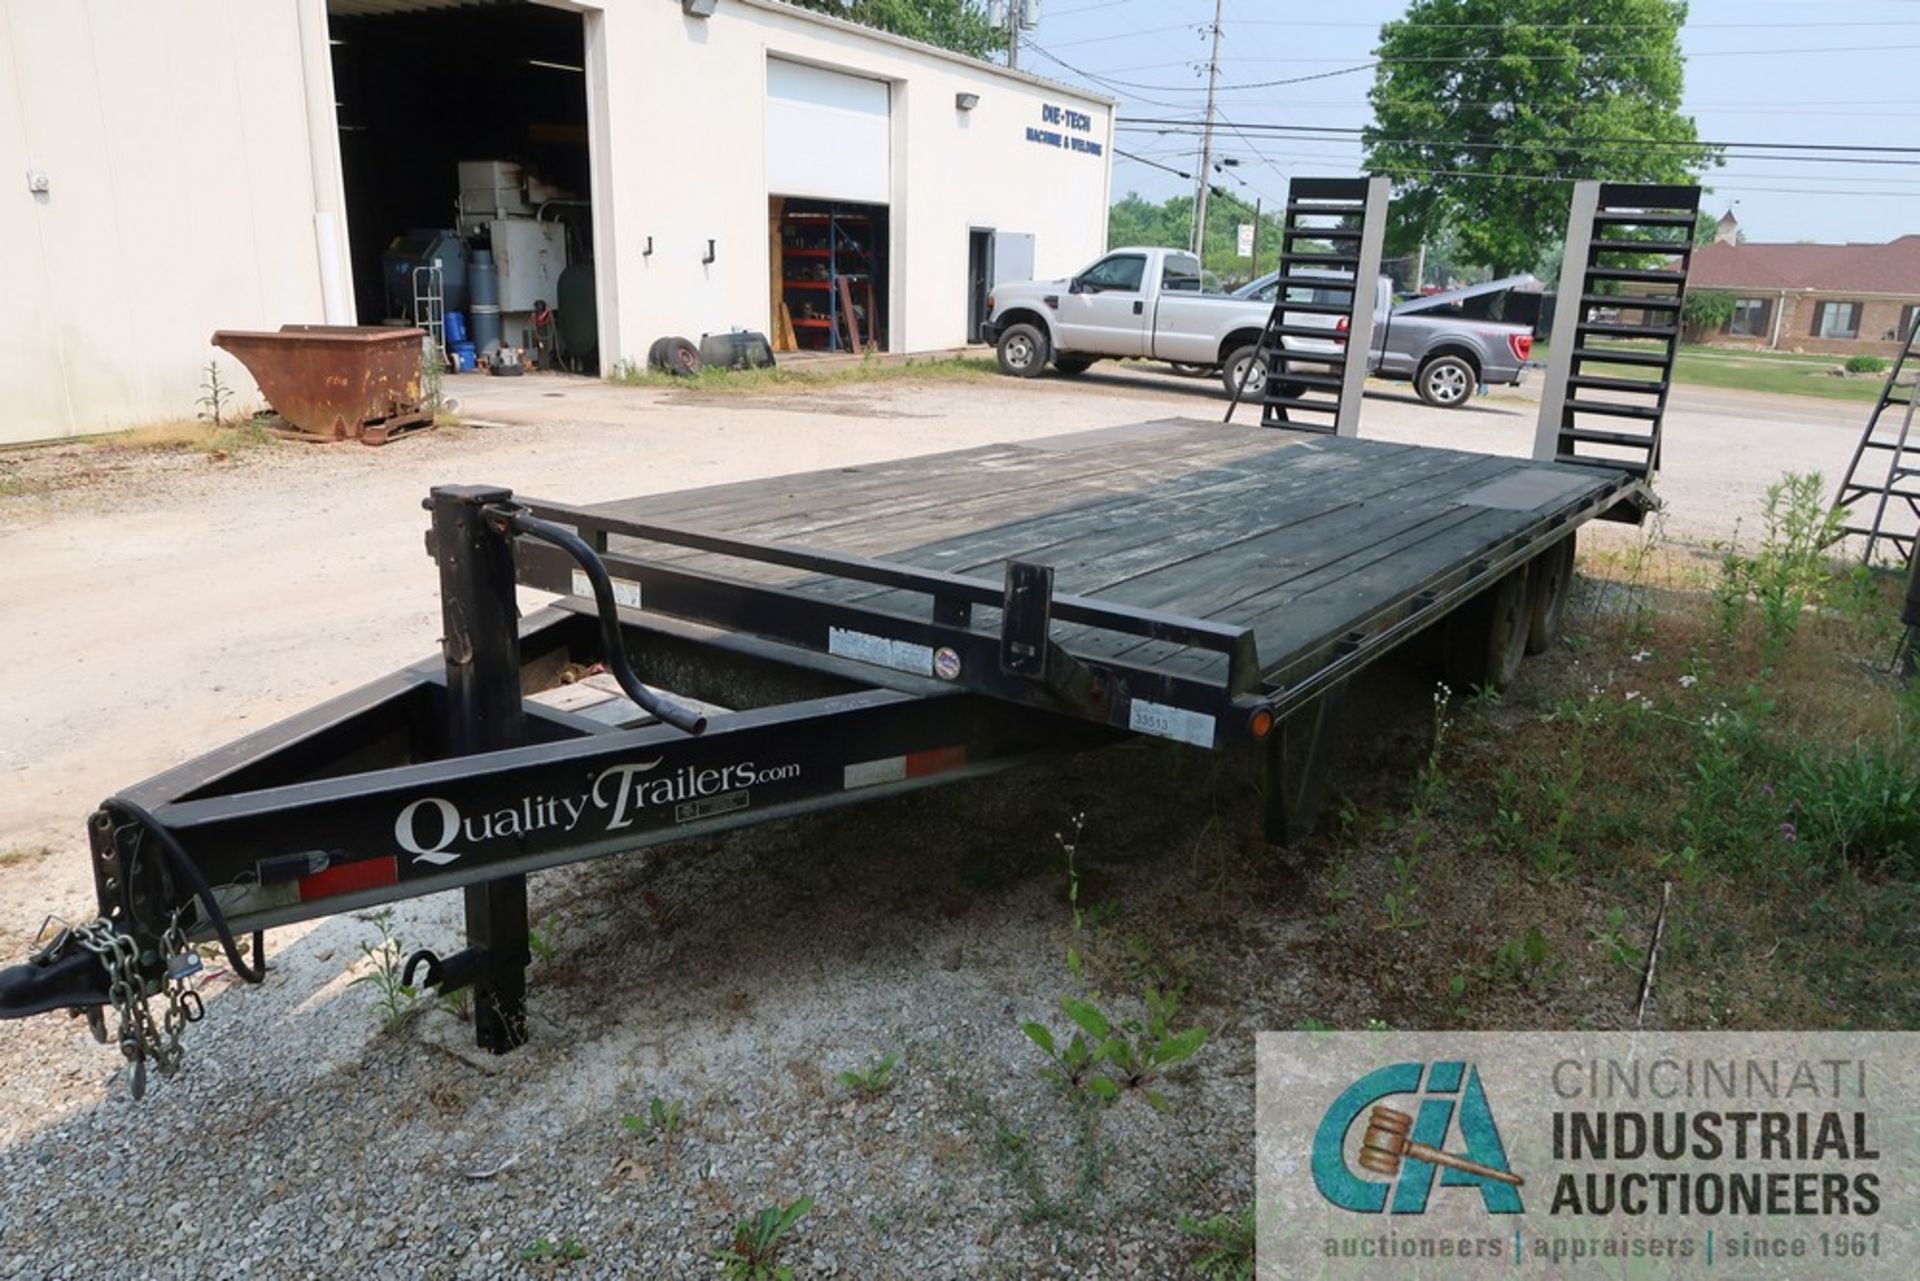 8'W X 16' QUALITY TRAILER TANDEM AXLE TRAILER; VIN # 550FP2029DS003430, 45" DOVETAIL, 64" RAMPS, - Image 2 of 5